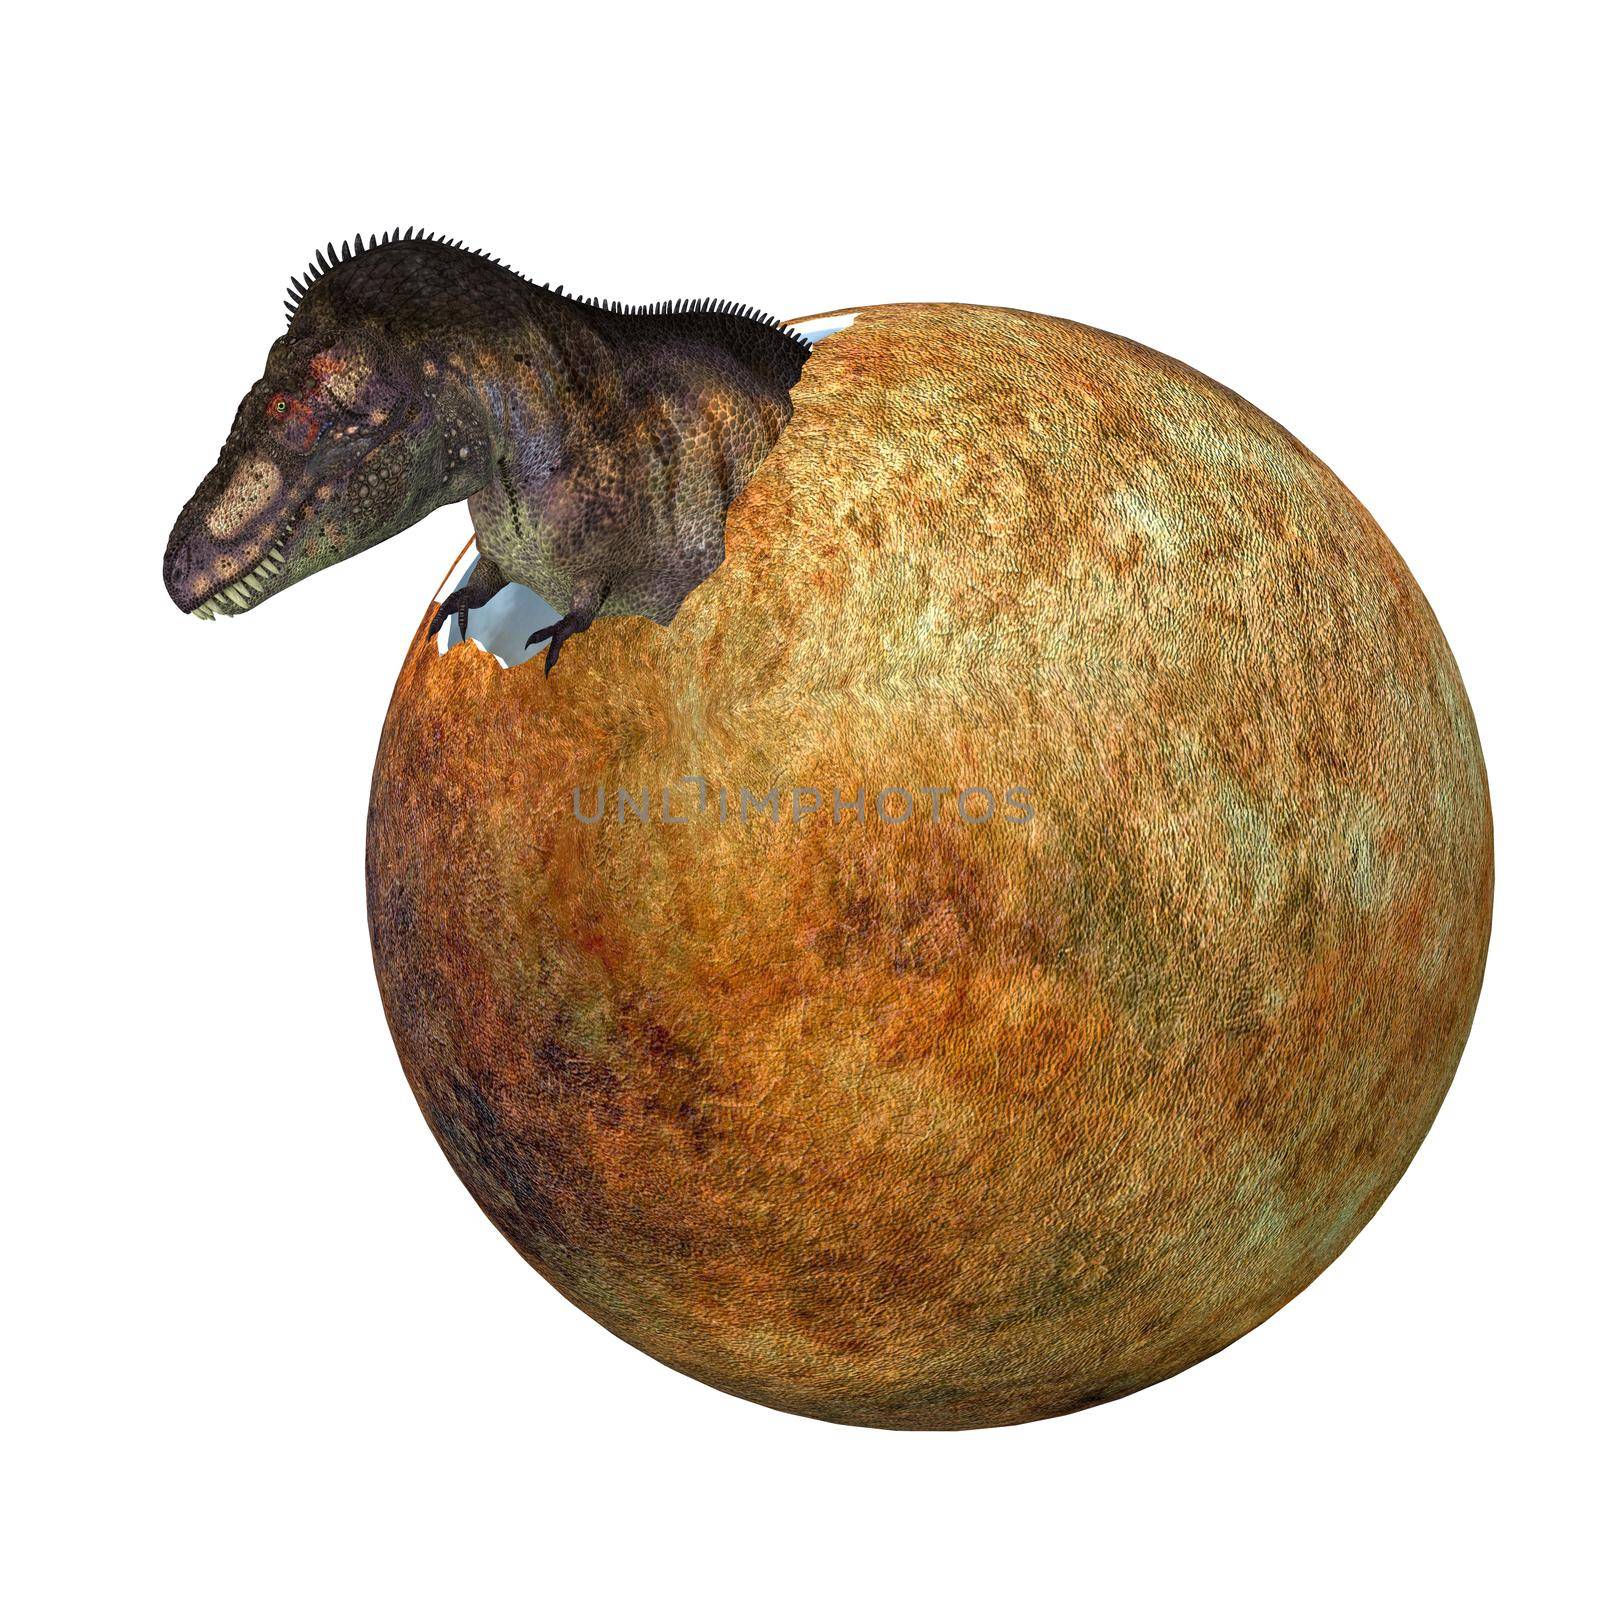 A baby Tyrannosaurus rex dinosaur hatches out of an egg during the Cretaceous Period of North America.